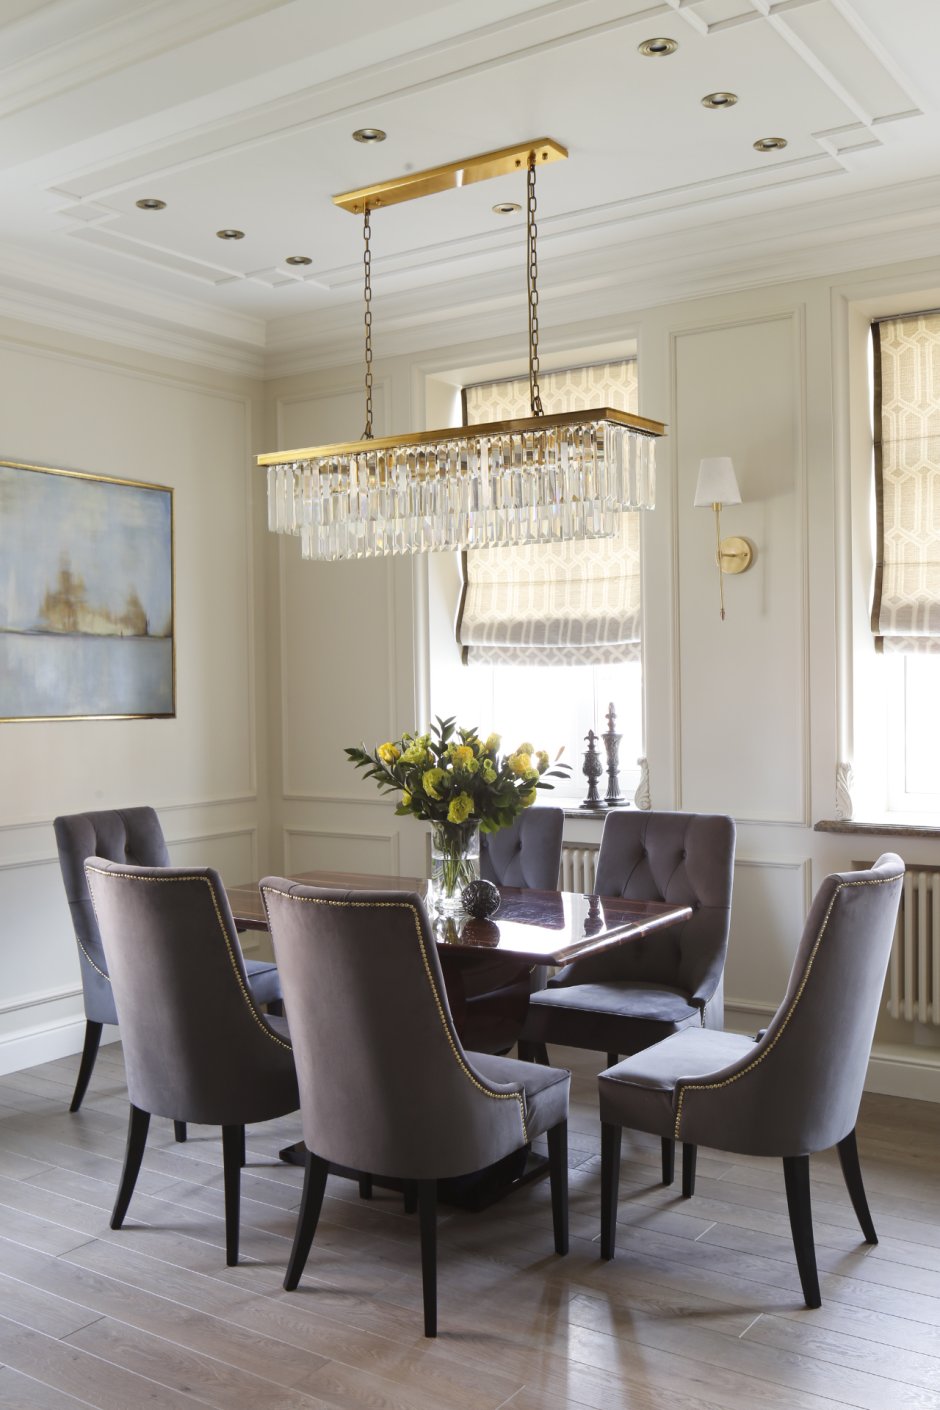 Hanging Chandelier over the Dining Table